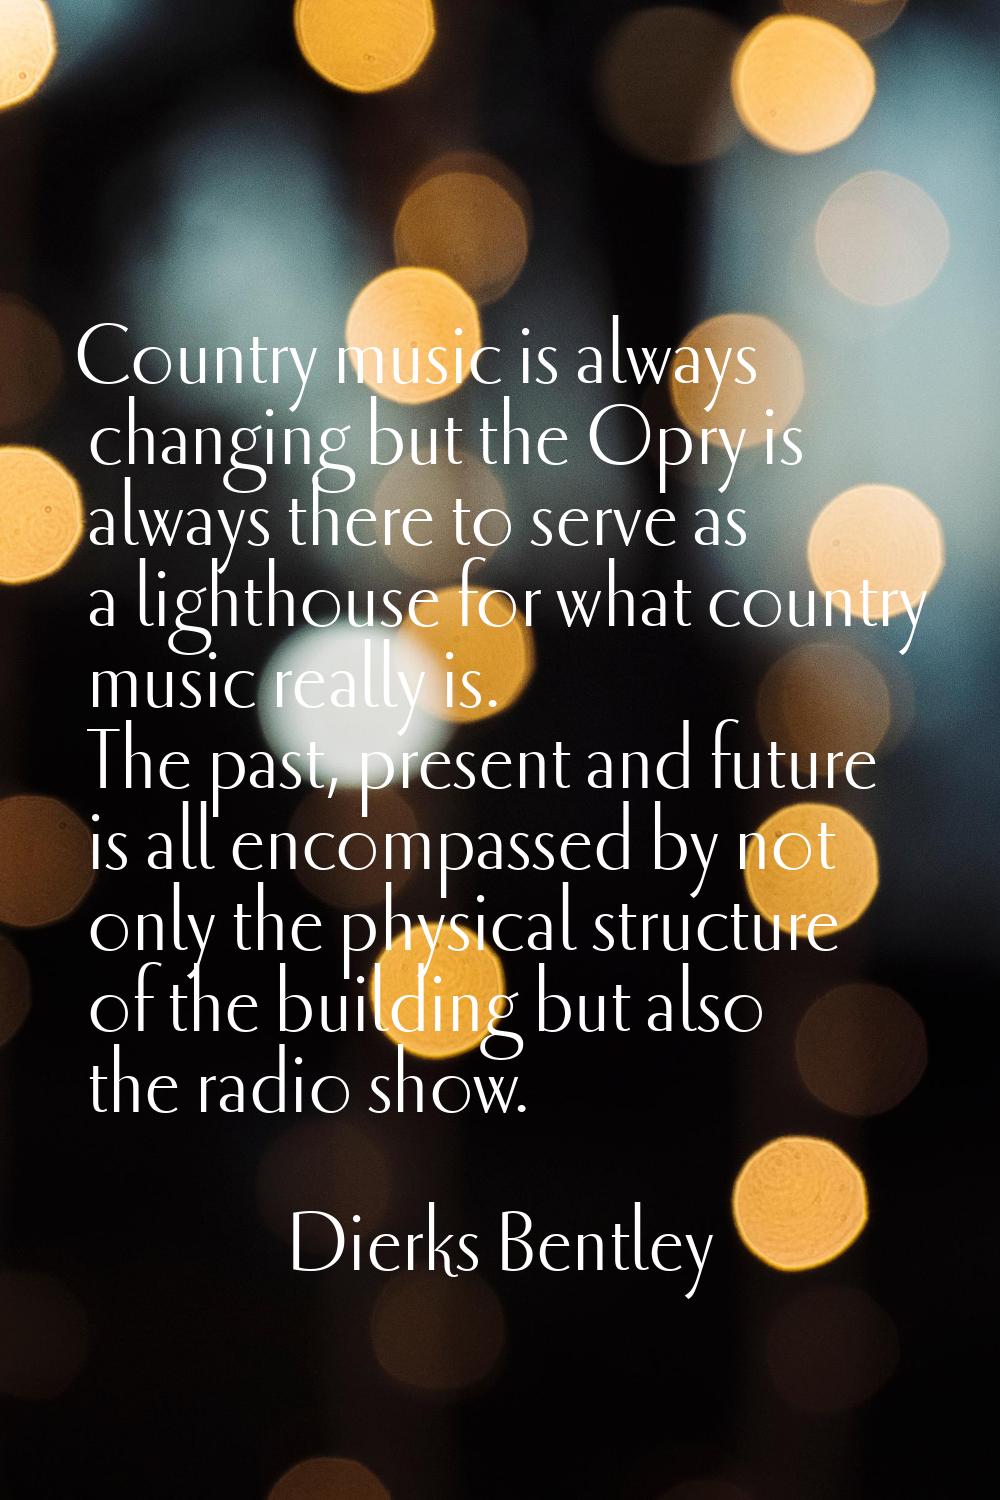 Country music is always changing but the Opry is always there to serve as a lighthouse for what cou